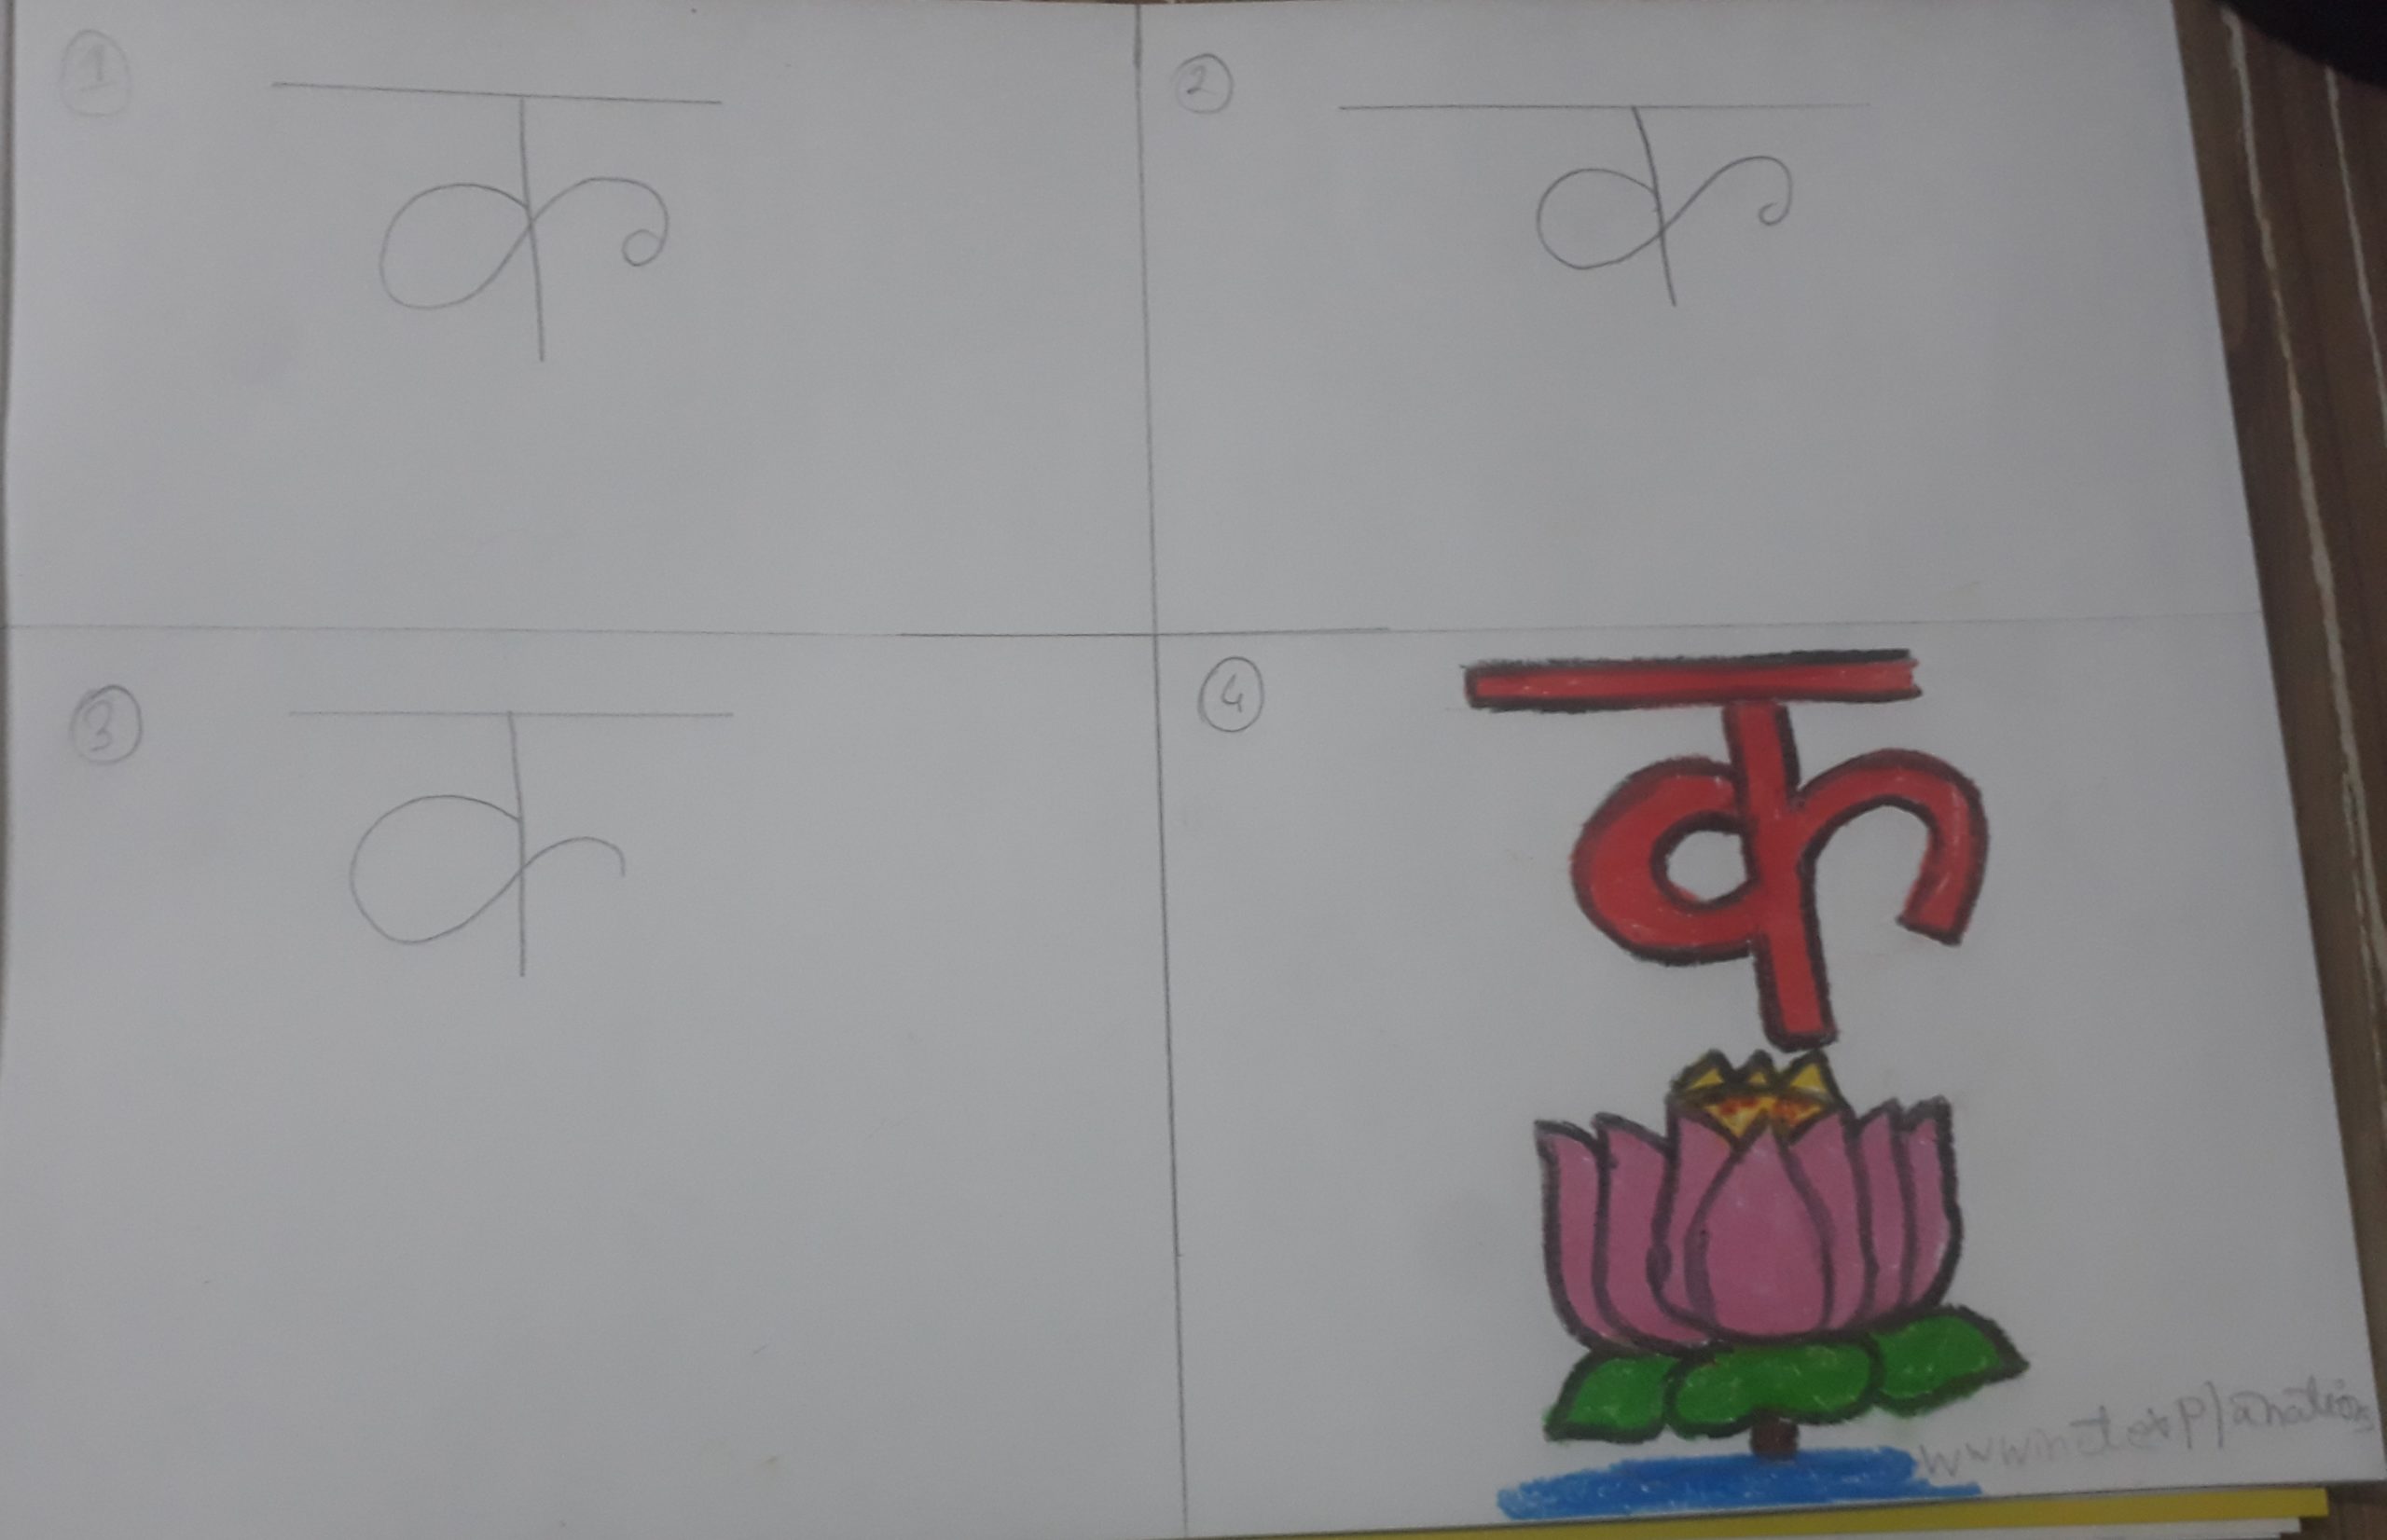 Hindi letters learning for children  Learn Hindi w drawing  Hindi Alphabet  simpleartcraft sac  YouTube